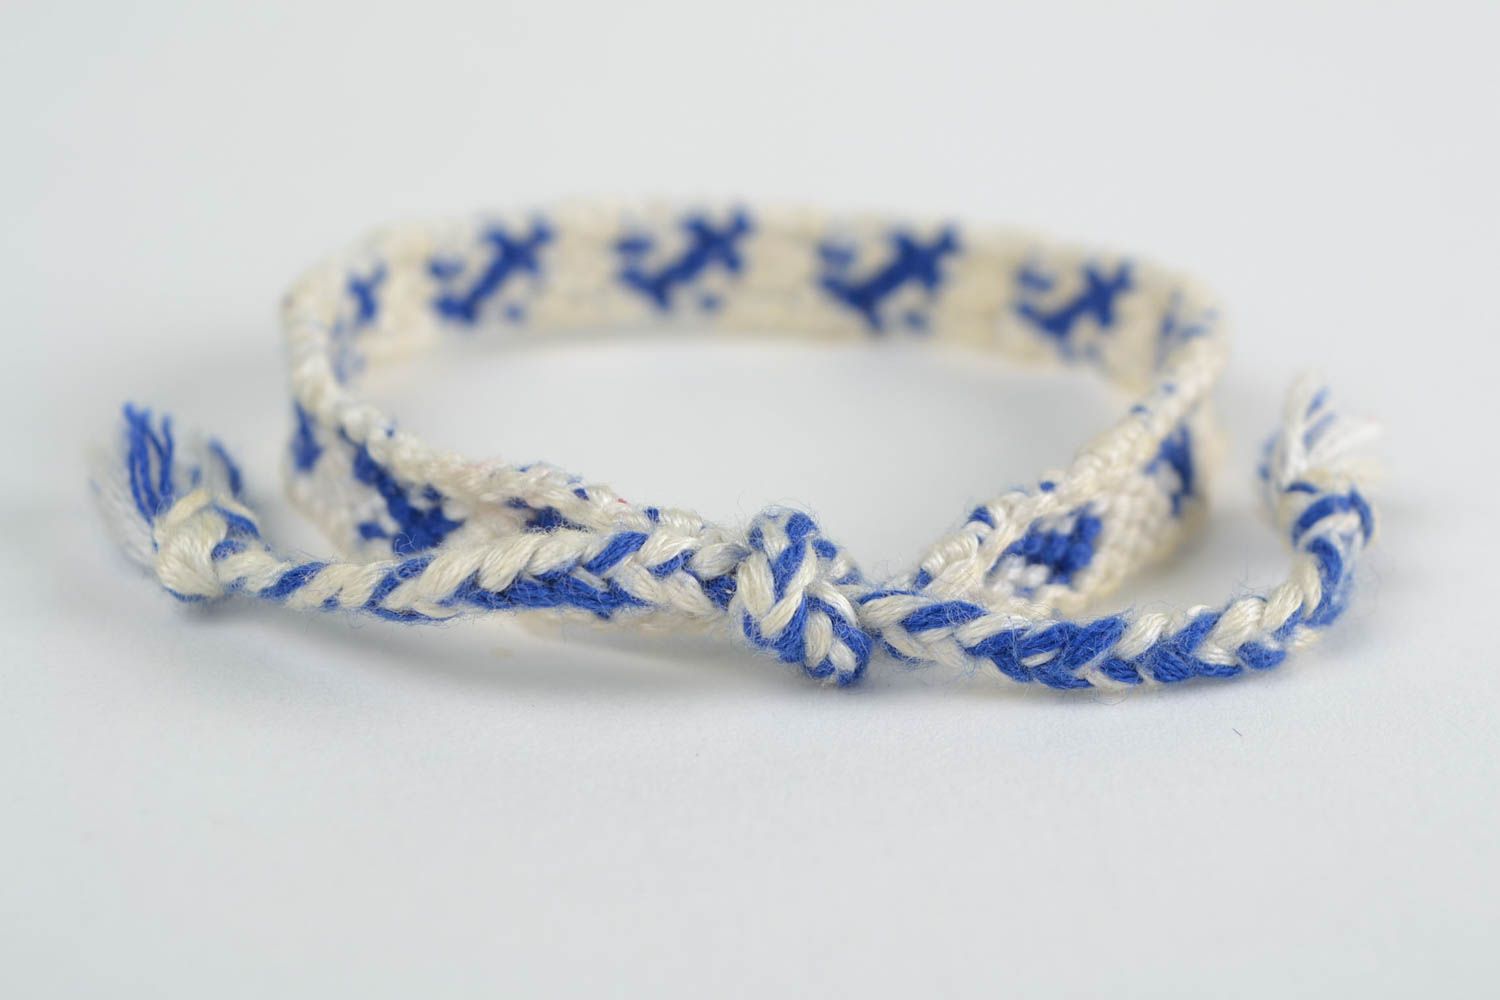 Handmade thin white and blue friendship wrist bracelet woven of threads with tie photo 4